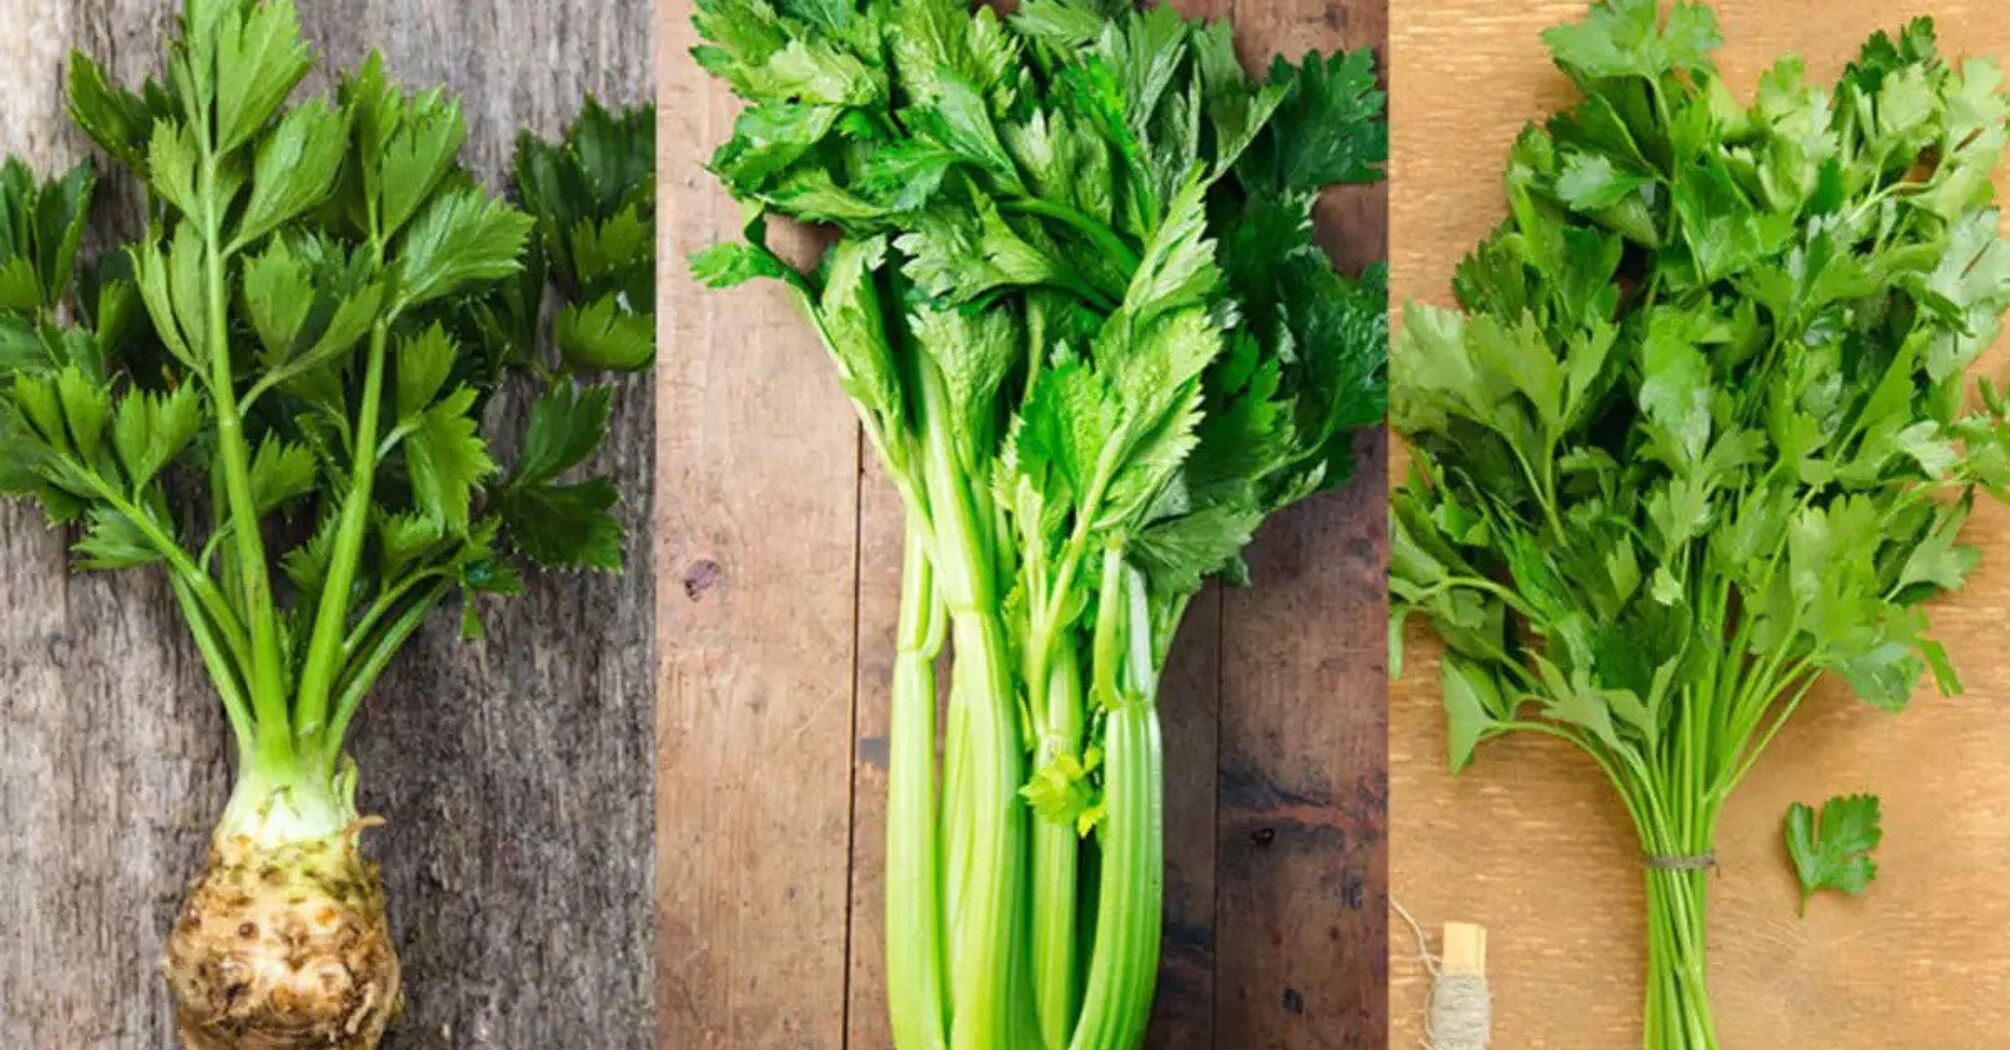 What distinguishes cilantro, parsley, and celery from each other